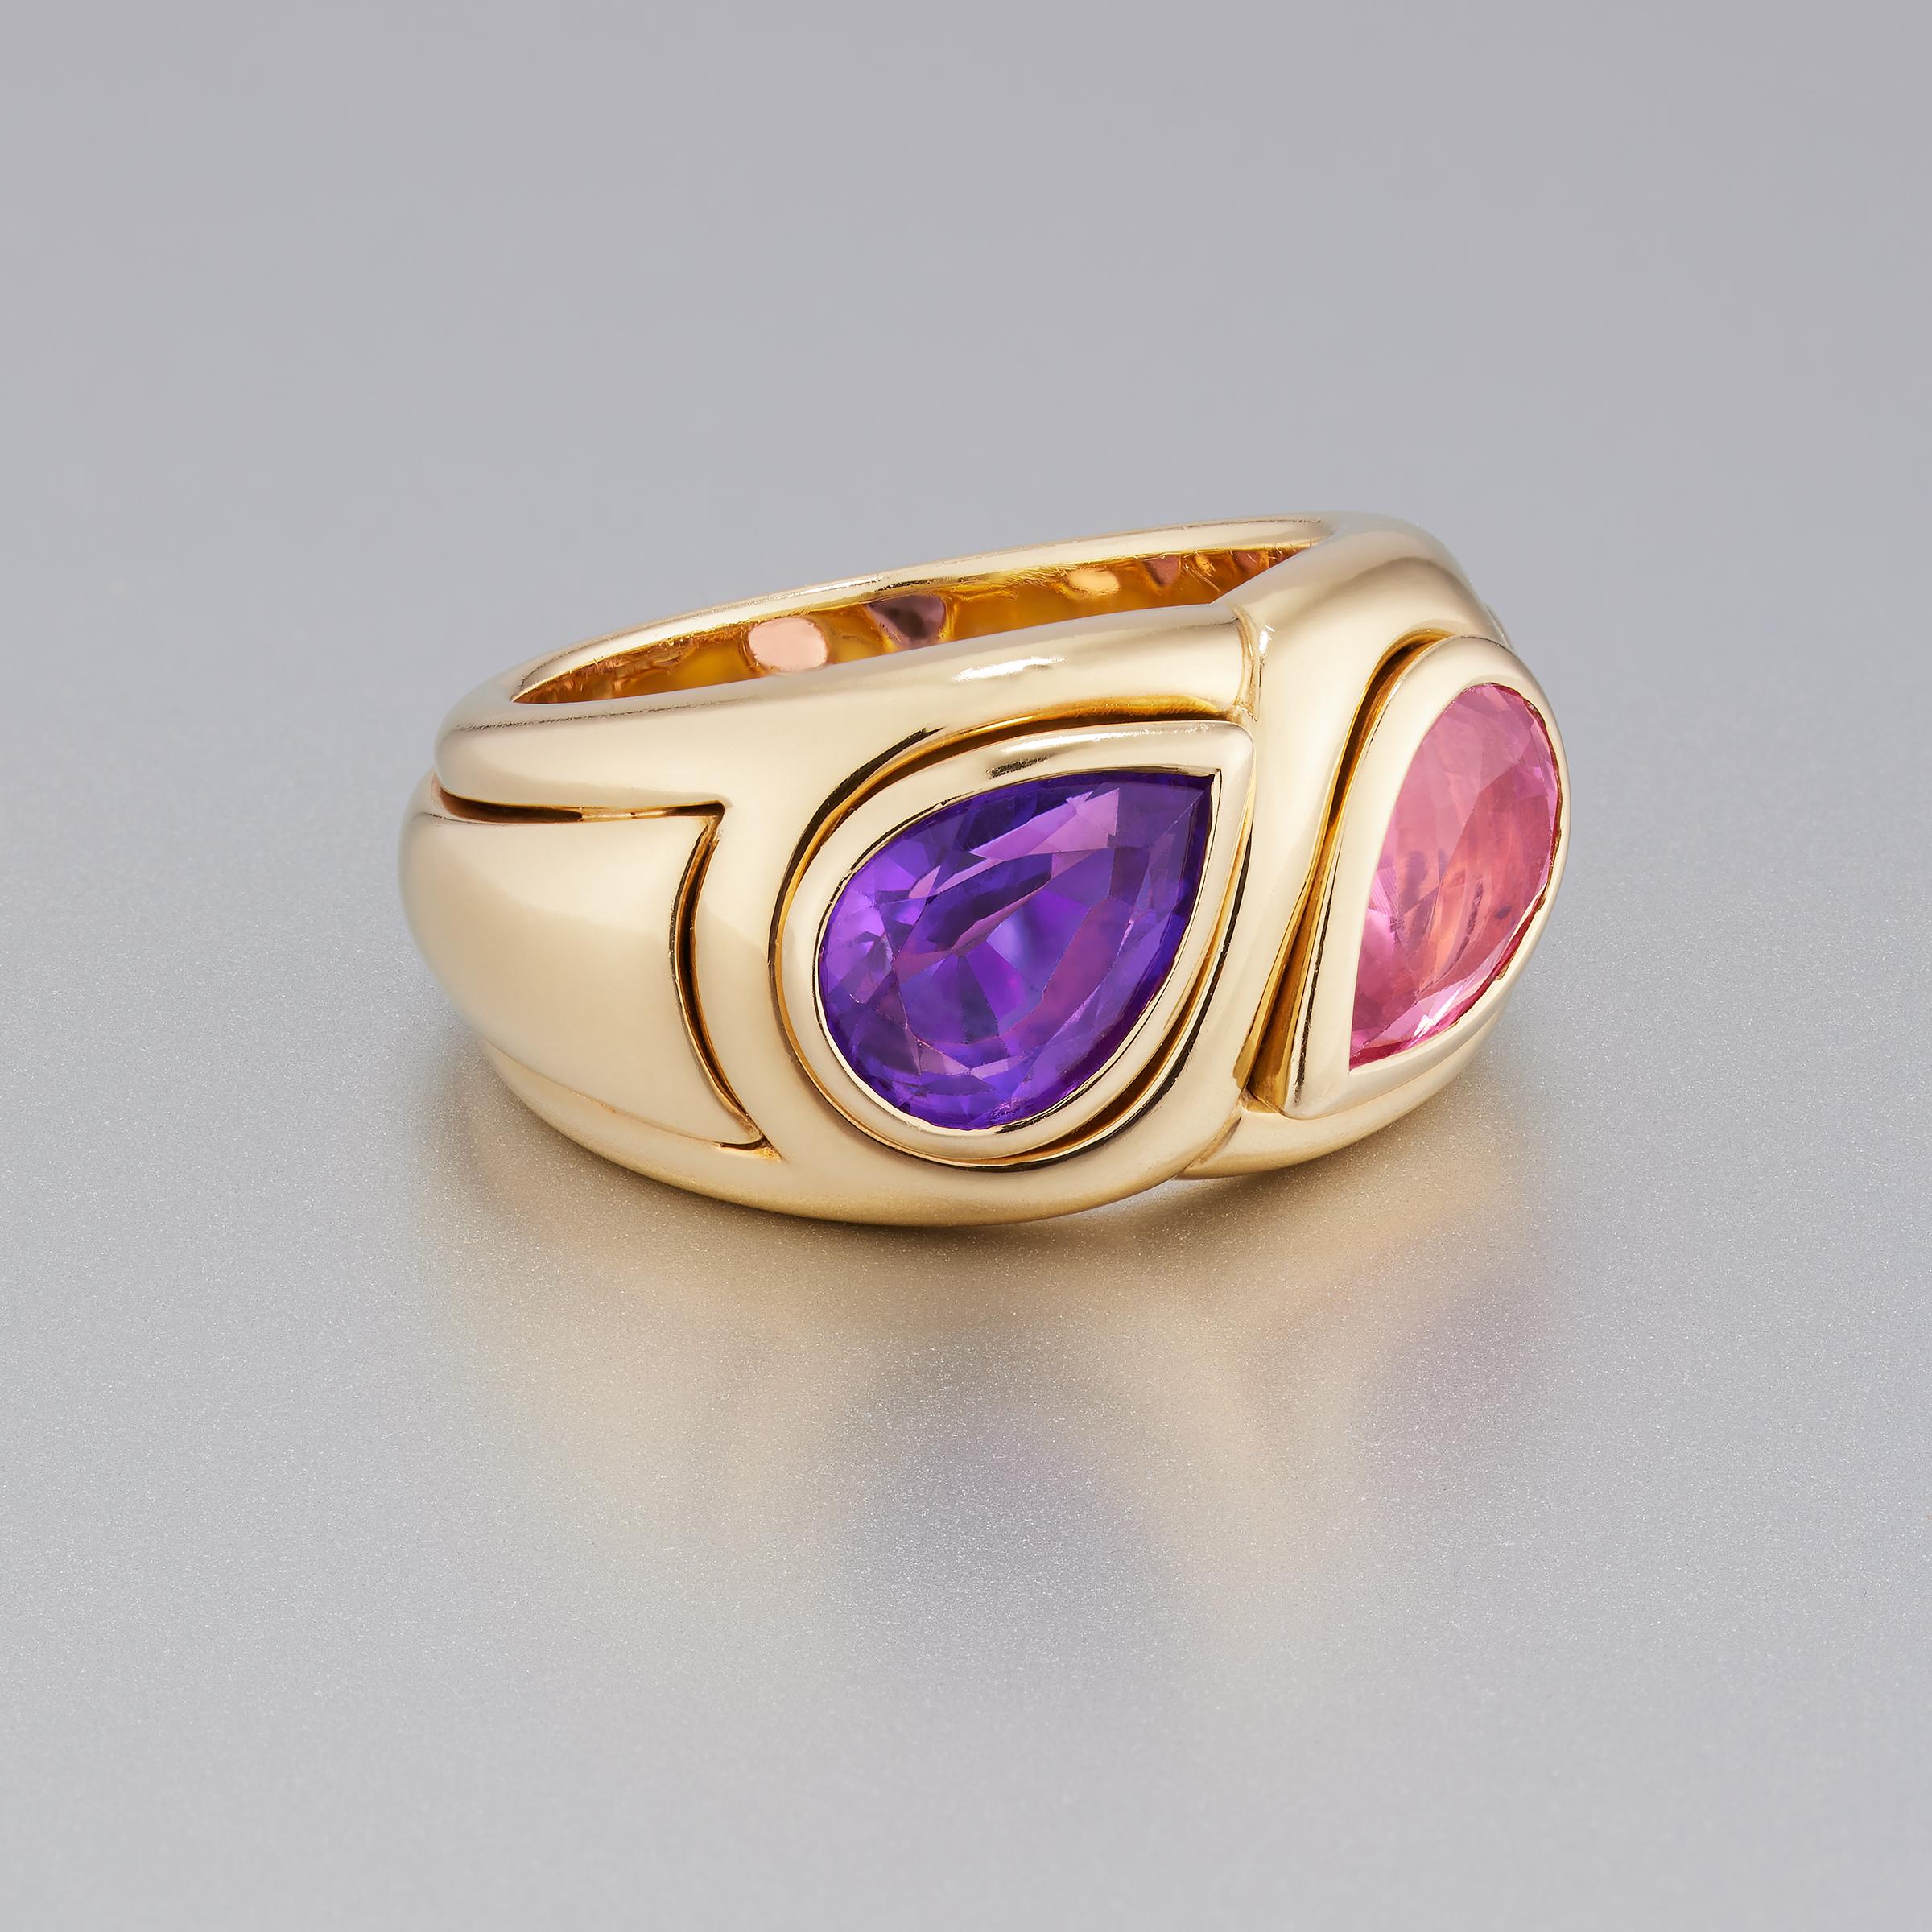 Stylish vintage Bulgari ring features vivid pink tourmaline and purple amethyst gemstones set in 18 karat yellow gold. The two pear-shaped gemstones are facing one another in an elegant ‘Toi et Moi’ design enhanced by complementary outlining and